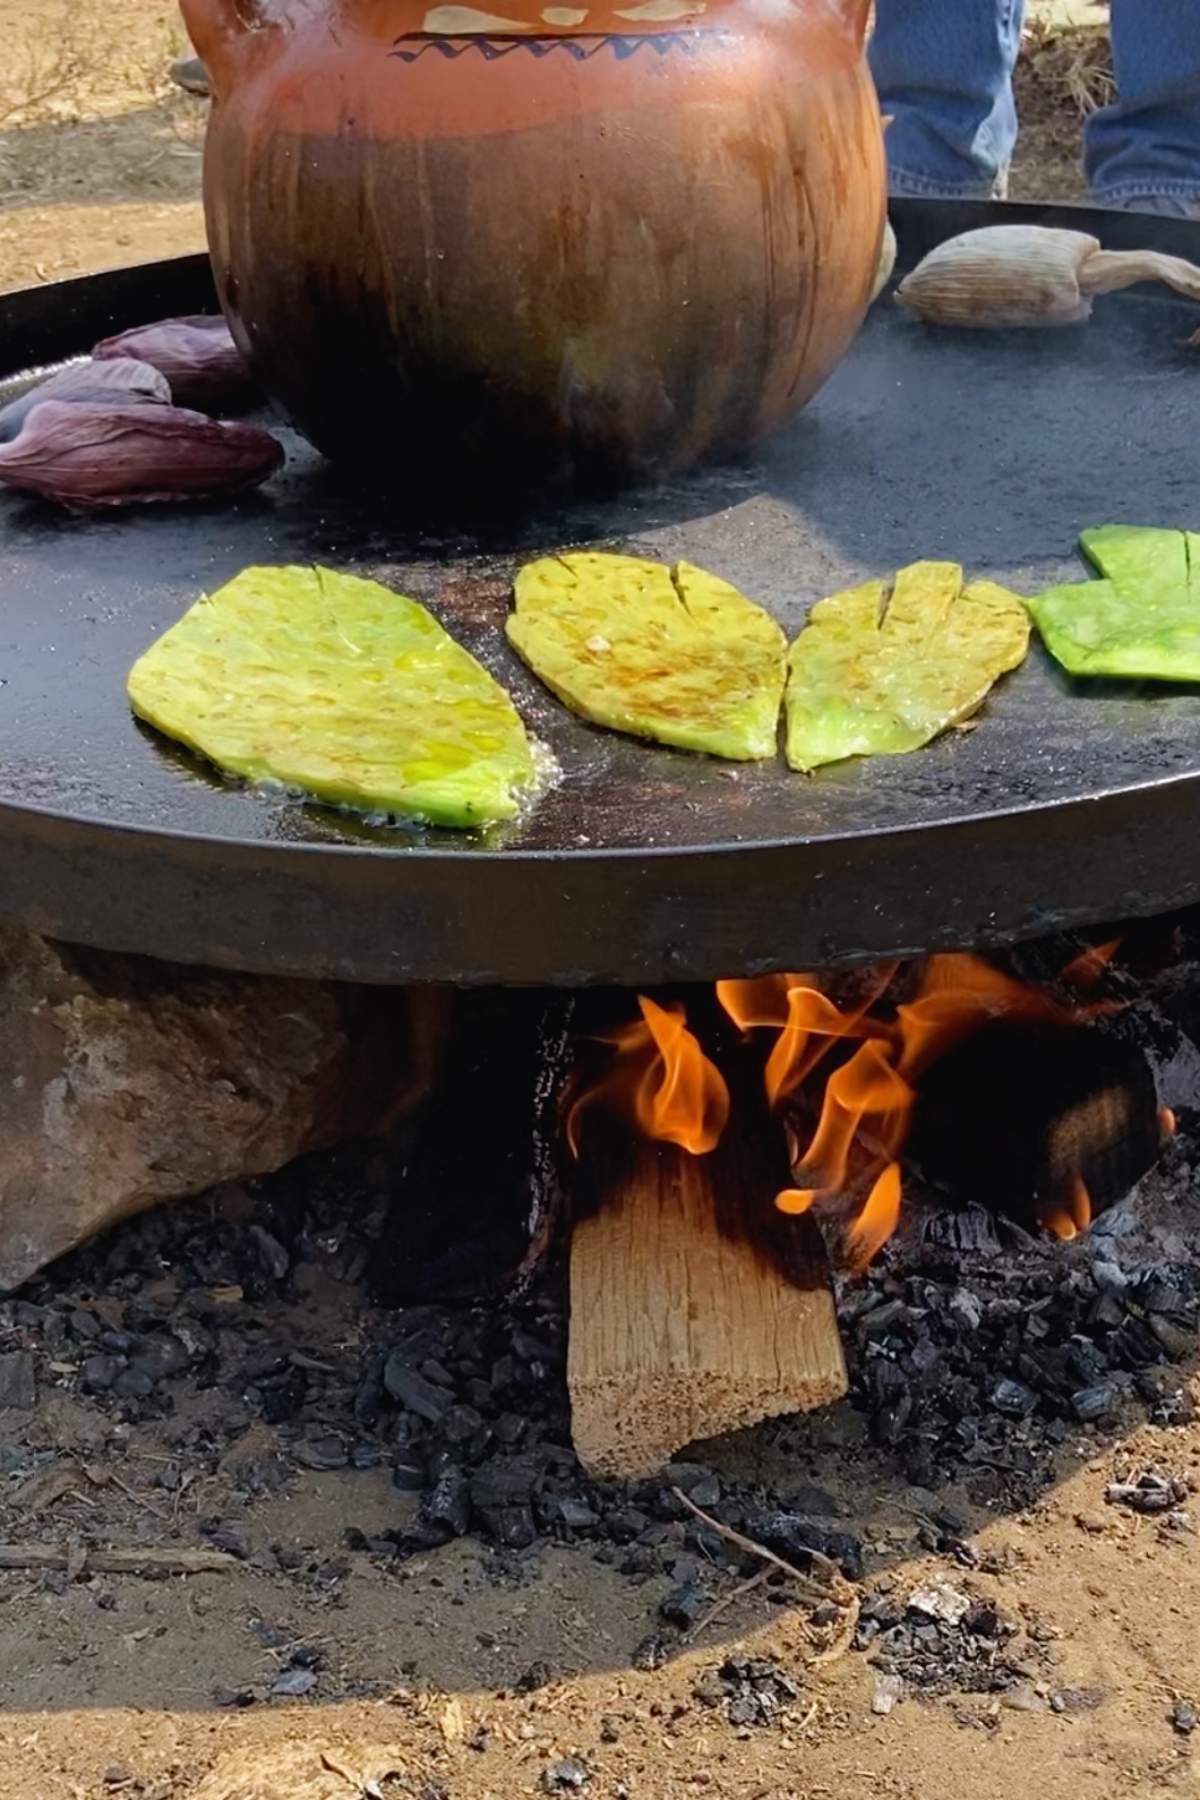 Cooking nopal on the comal.